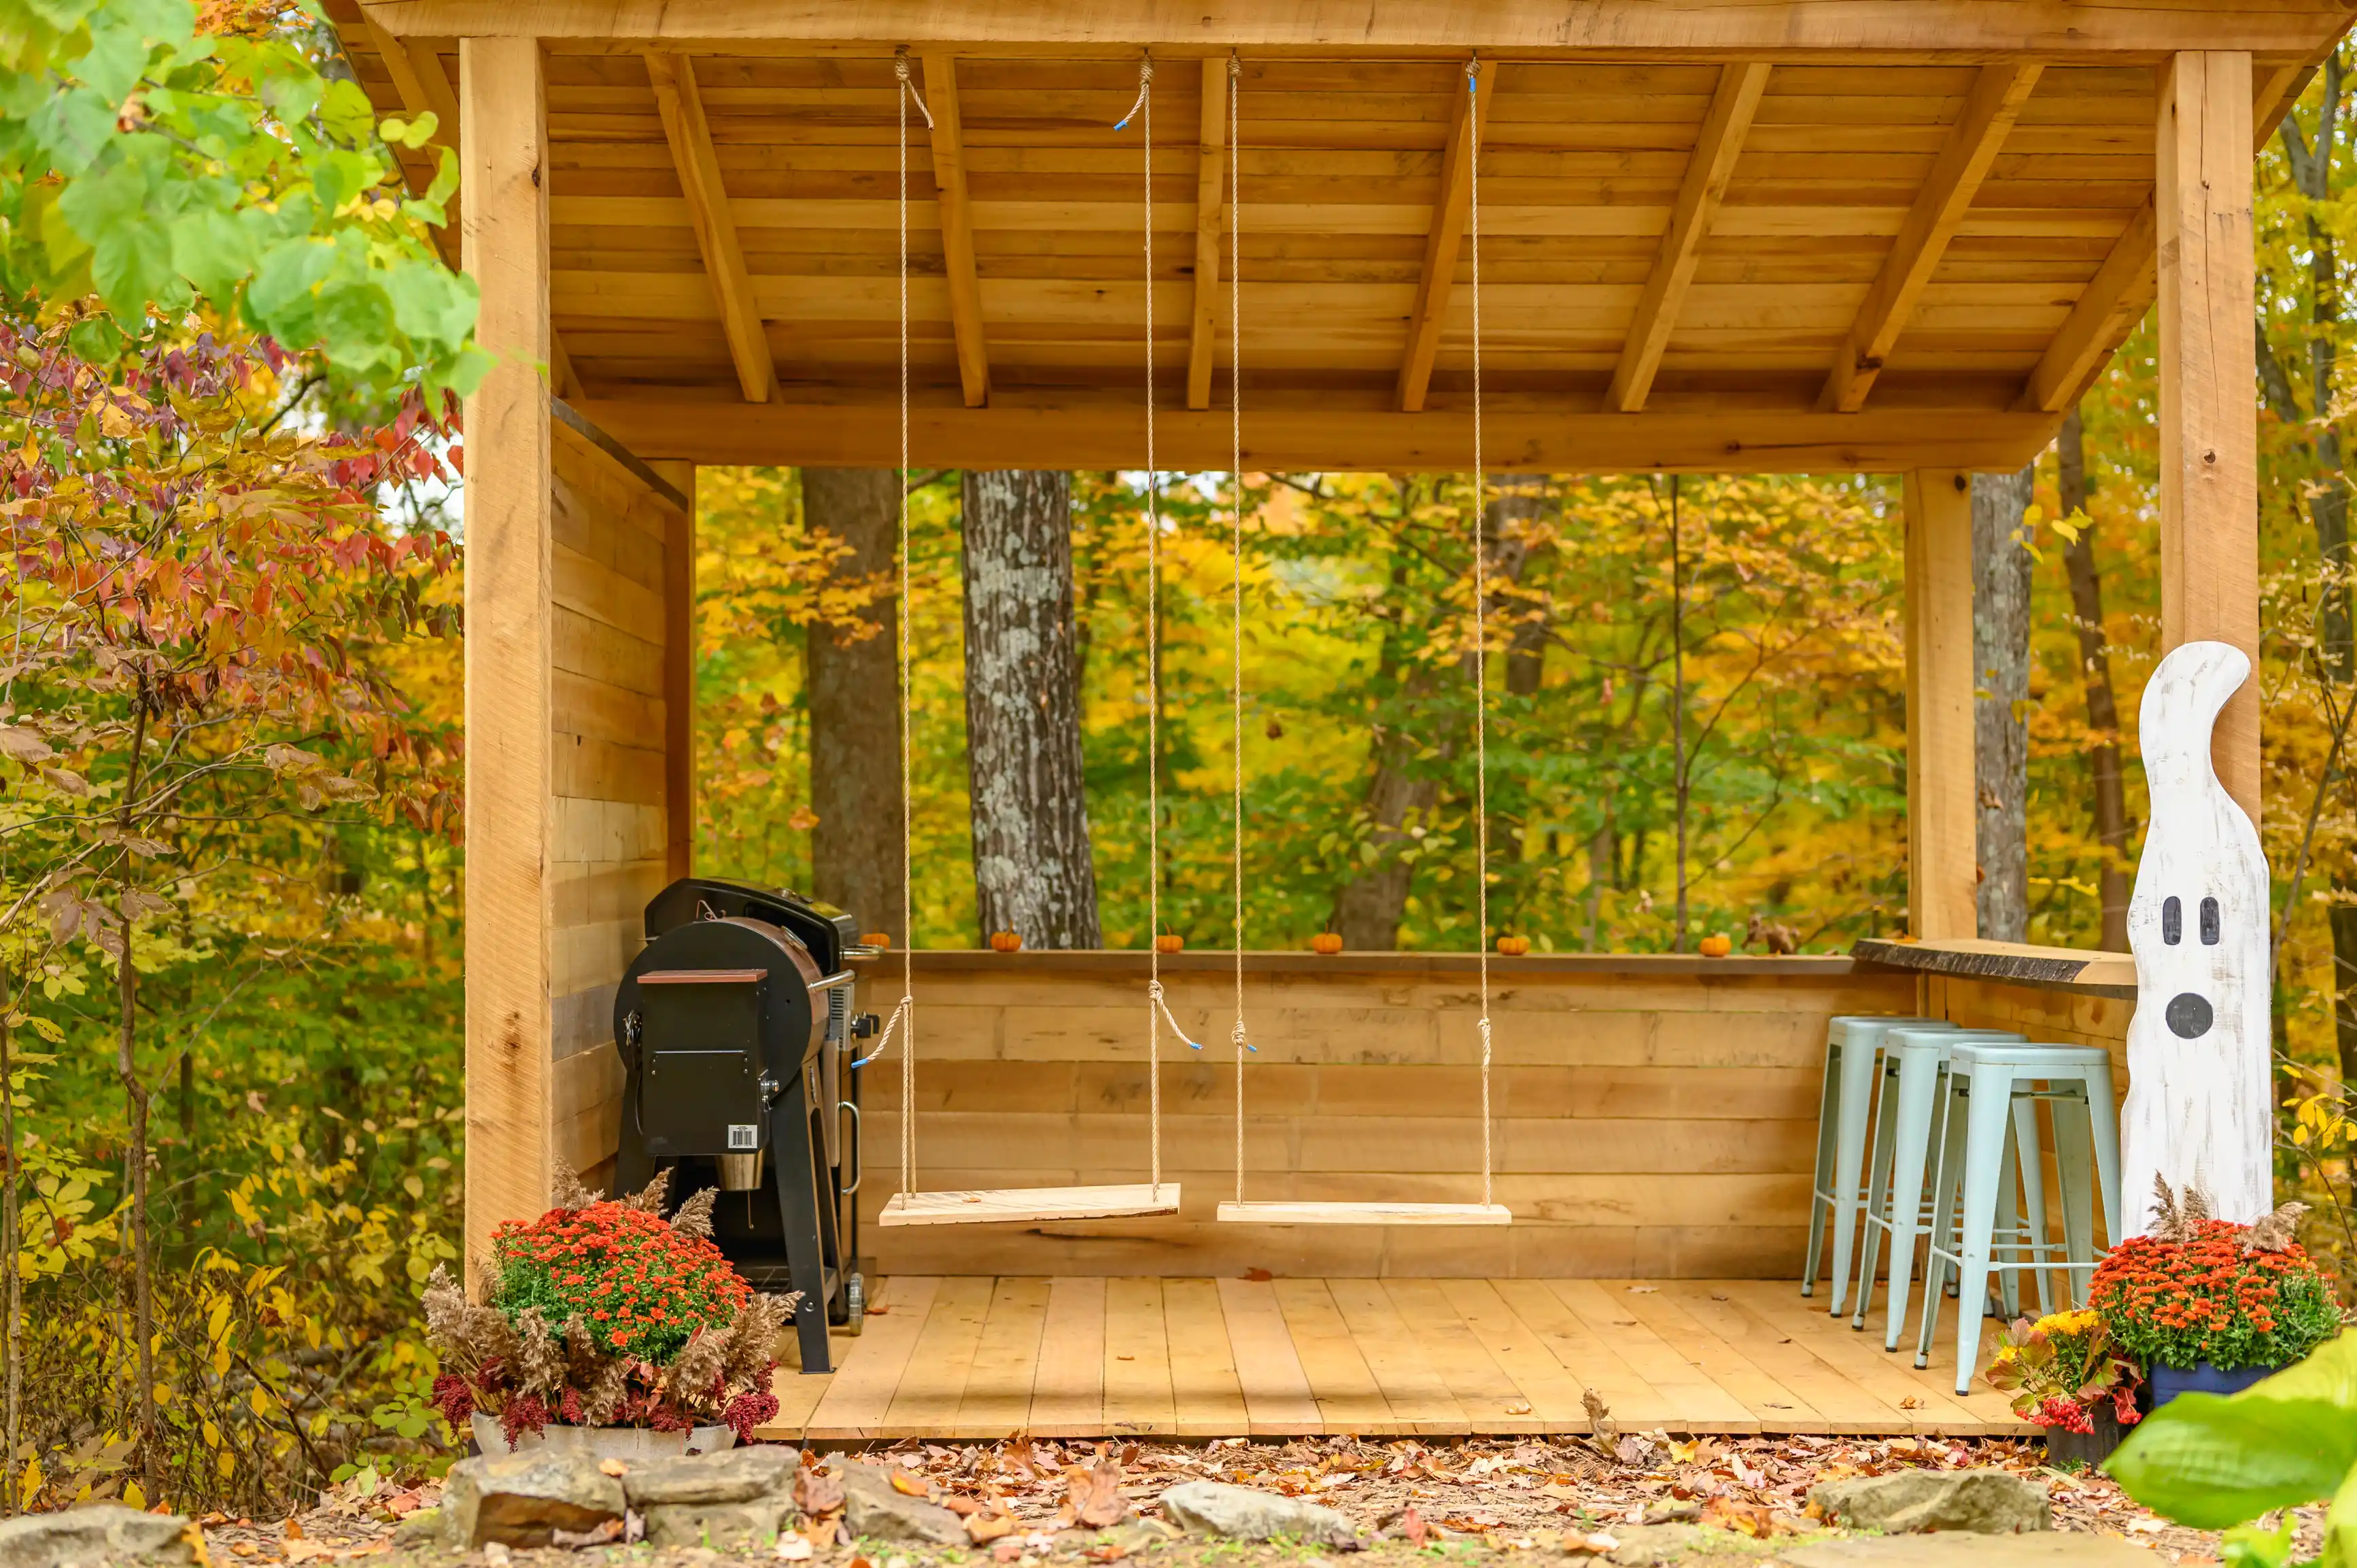 Wooden porch with a swing, barbecue grill, and Halloween decorations, surrounded by autumn foliage.